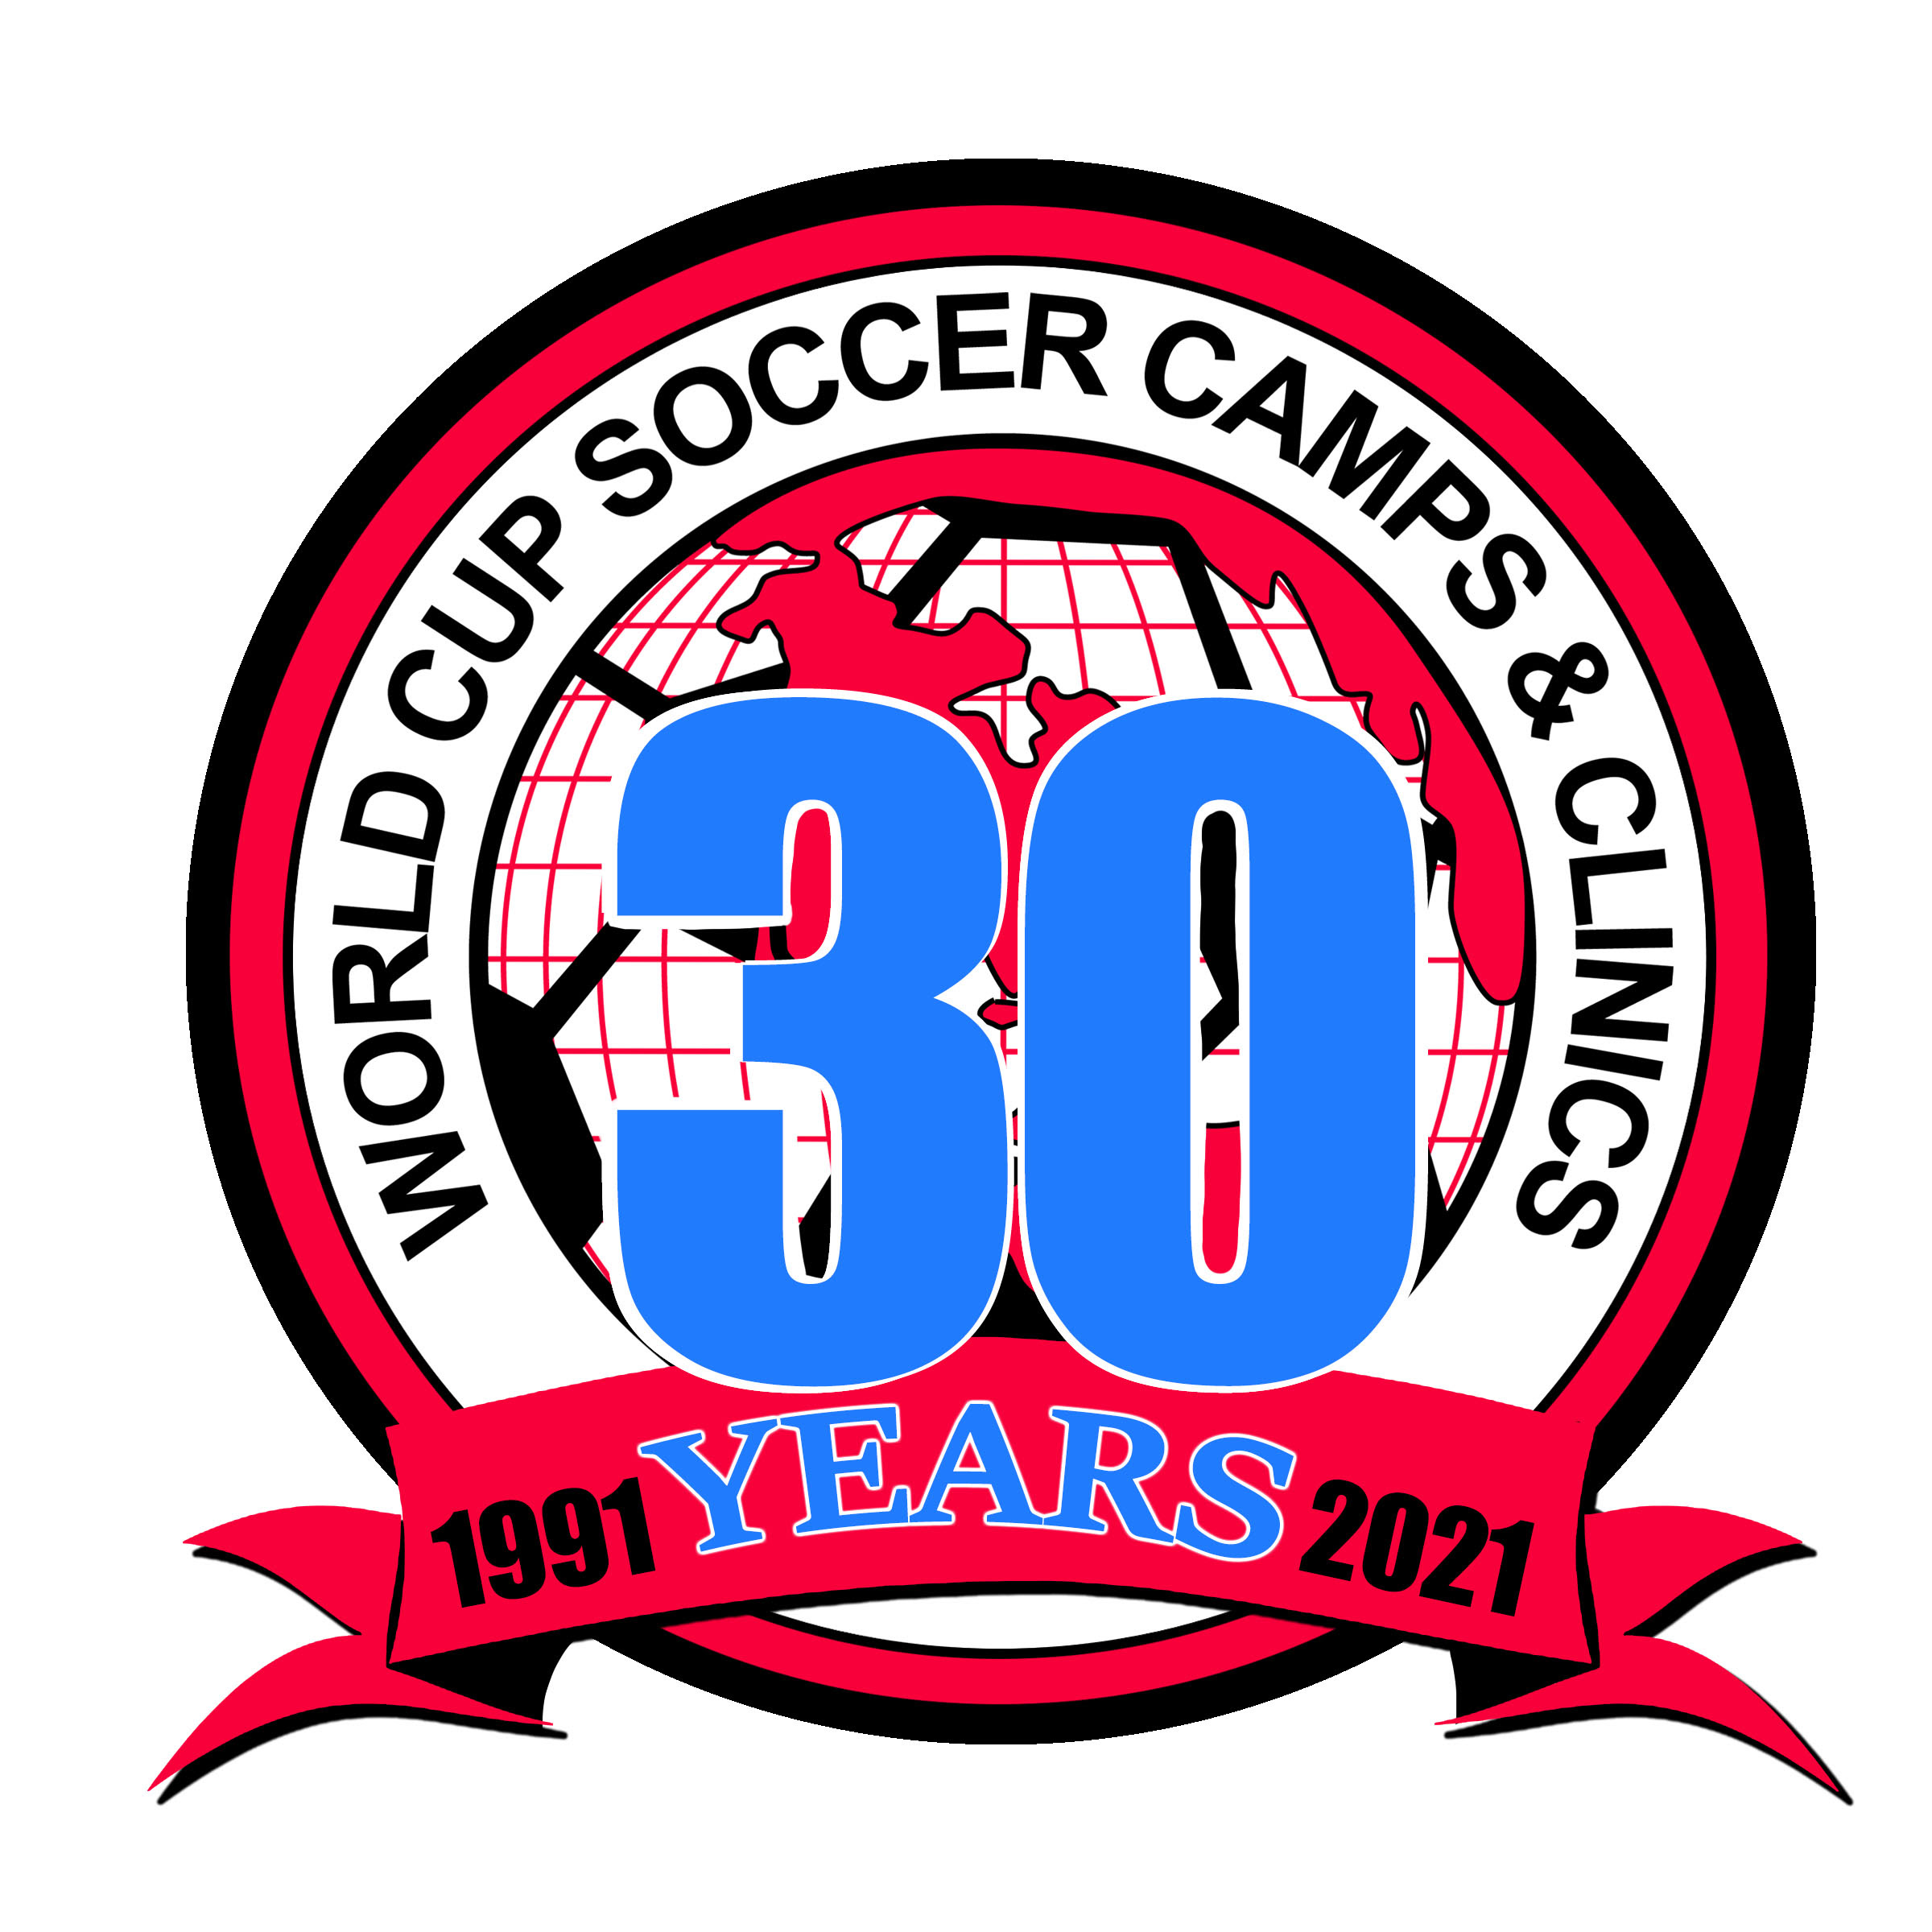 30th anniversary logo 002 - World Cup Soccer Camps